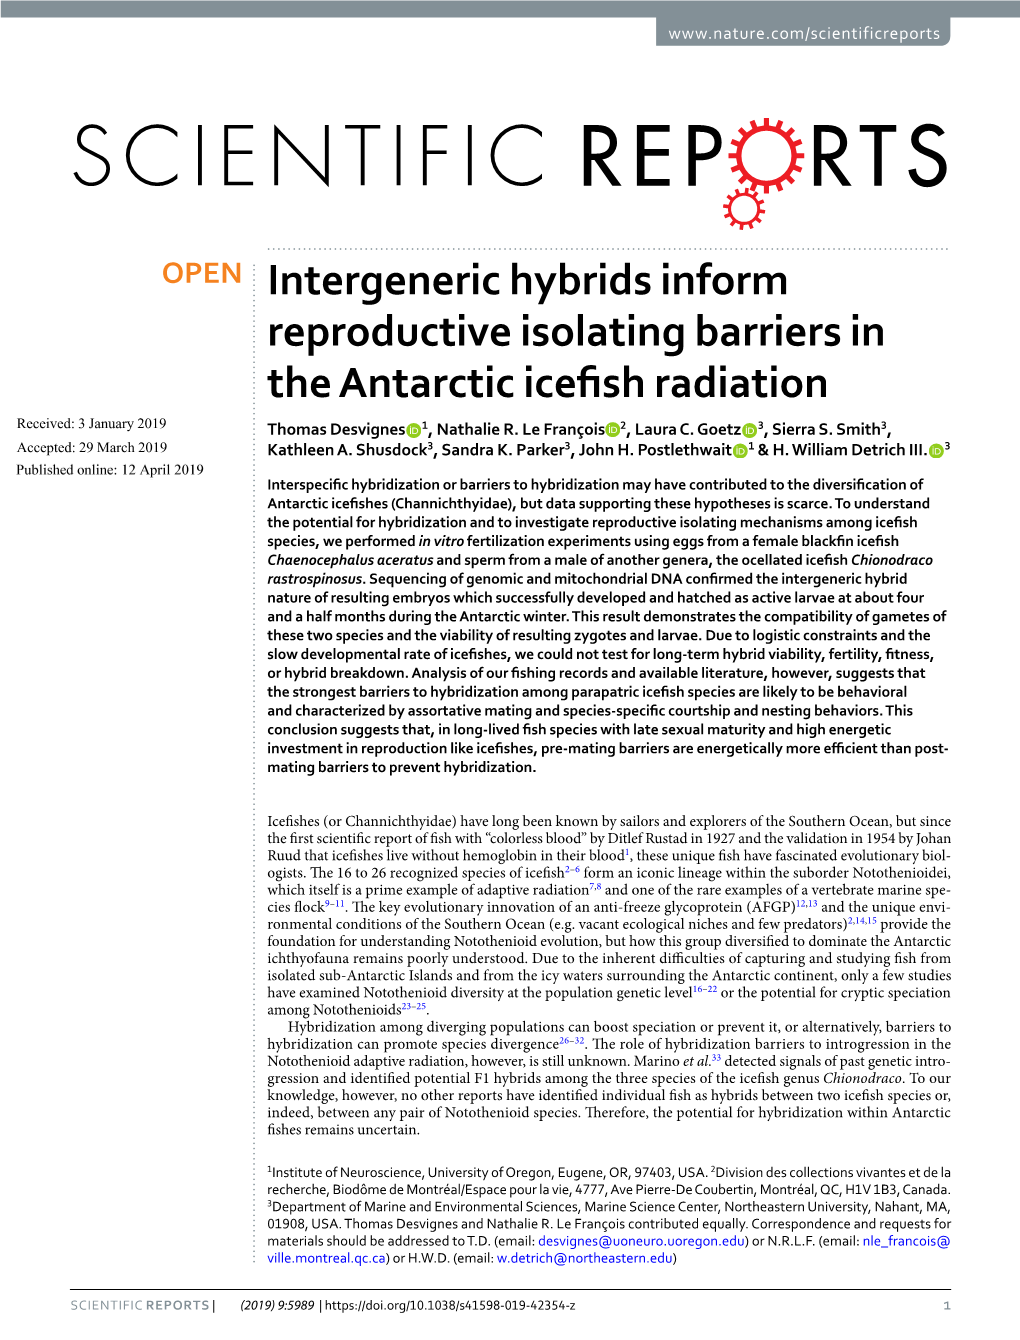 Intergeneric Hybrids Inform Reproductive Isolating Barriers in the Antarctic Icefsh Radiation Received: 3 January 2019 Thomas Desvignes 1, Nathalie R